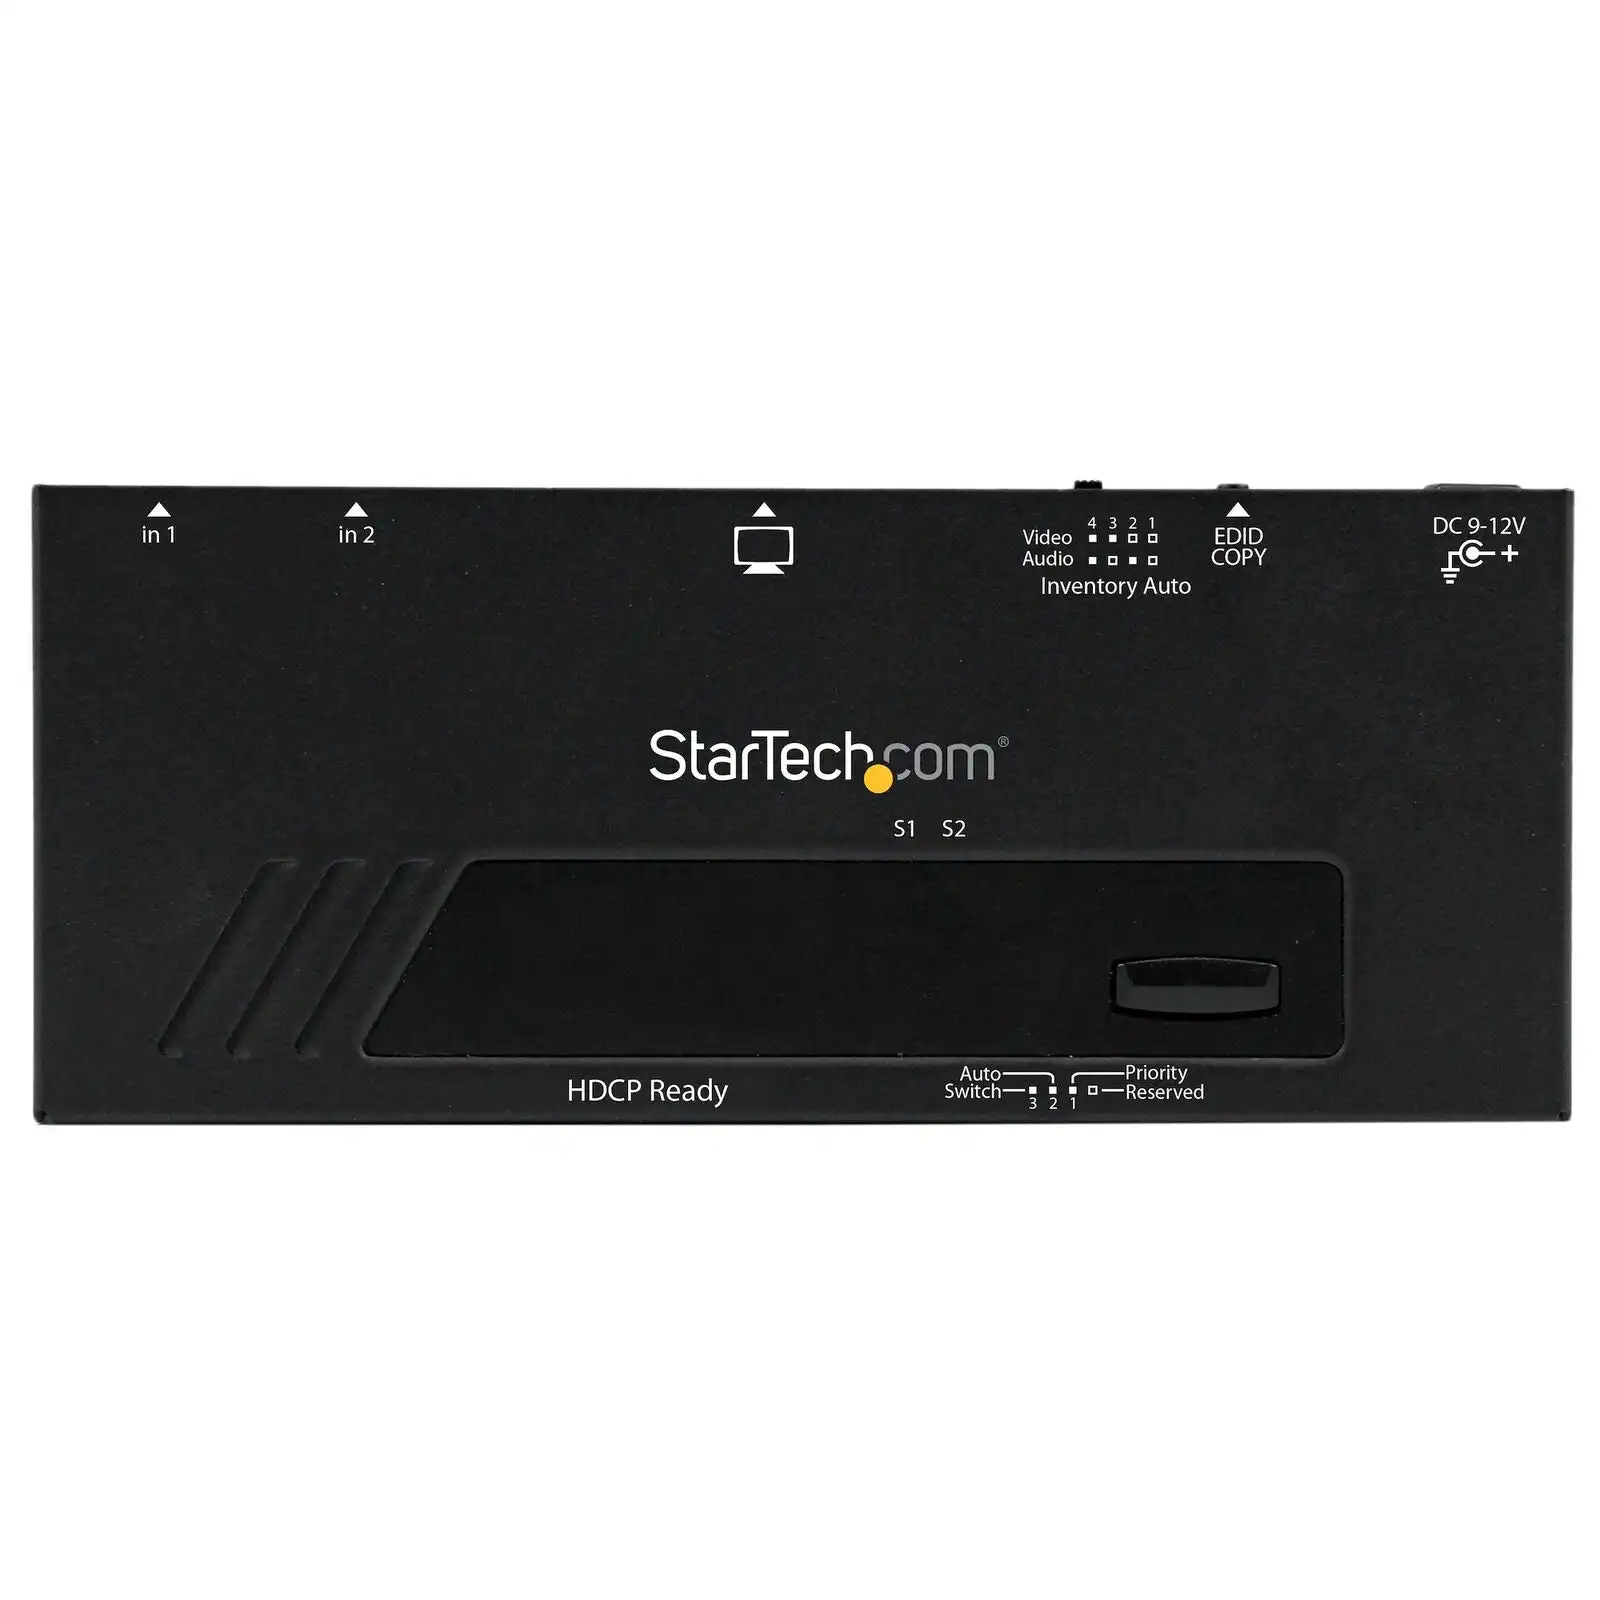 Star Tech 1080p 2 Port HDMI Switch Box w/ Automatic/Priority Switching + Remote